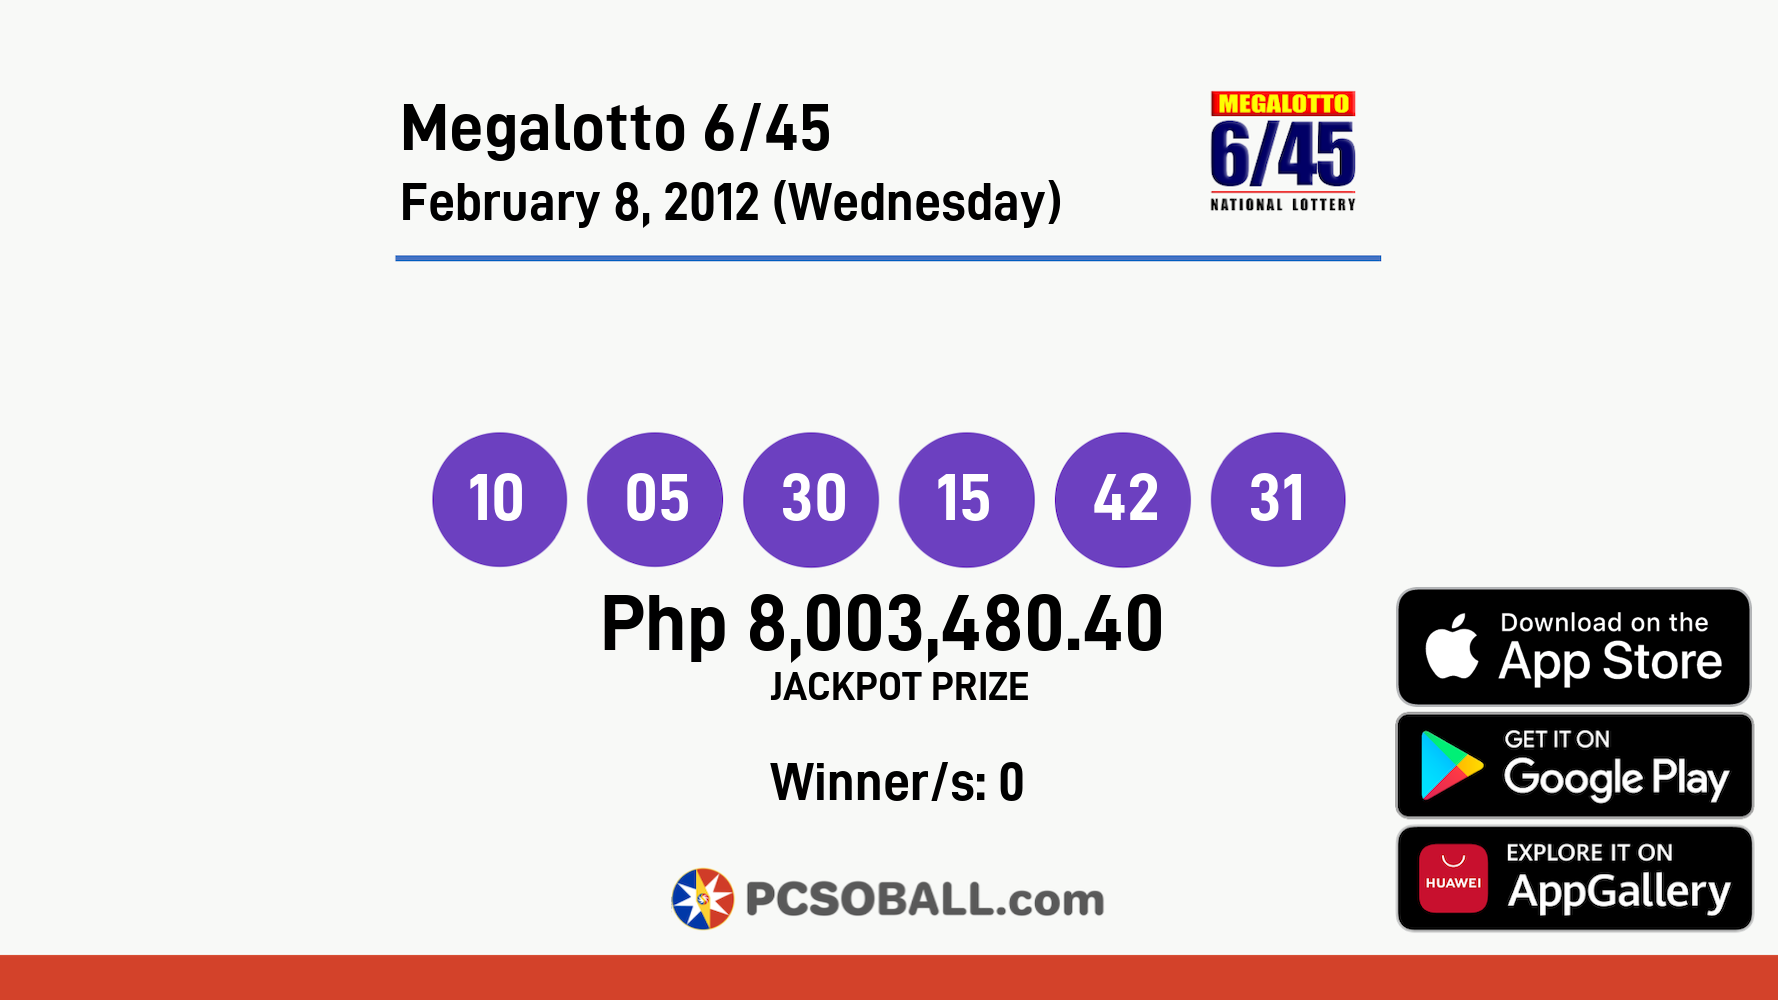 Megalotto 6/45 February 8, 2012 (Wednesday) Result